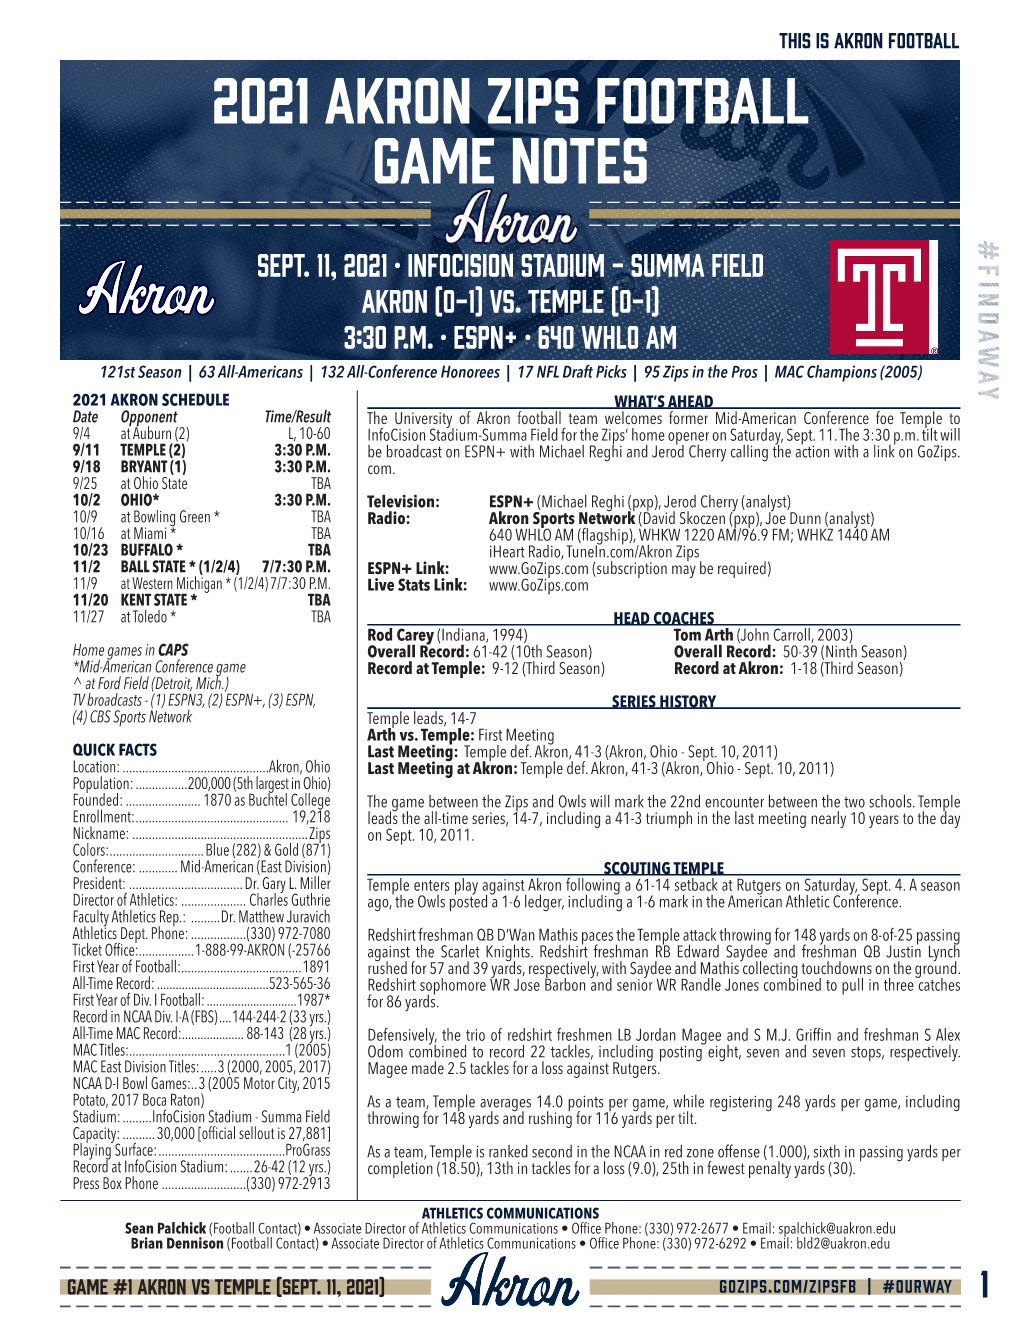 2021 Akron Zips Football Game Notes #Findaway Sept